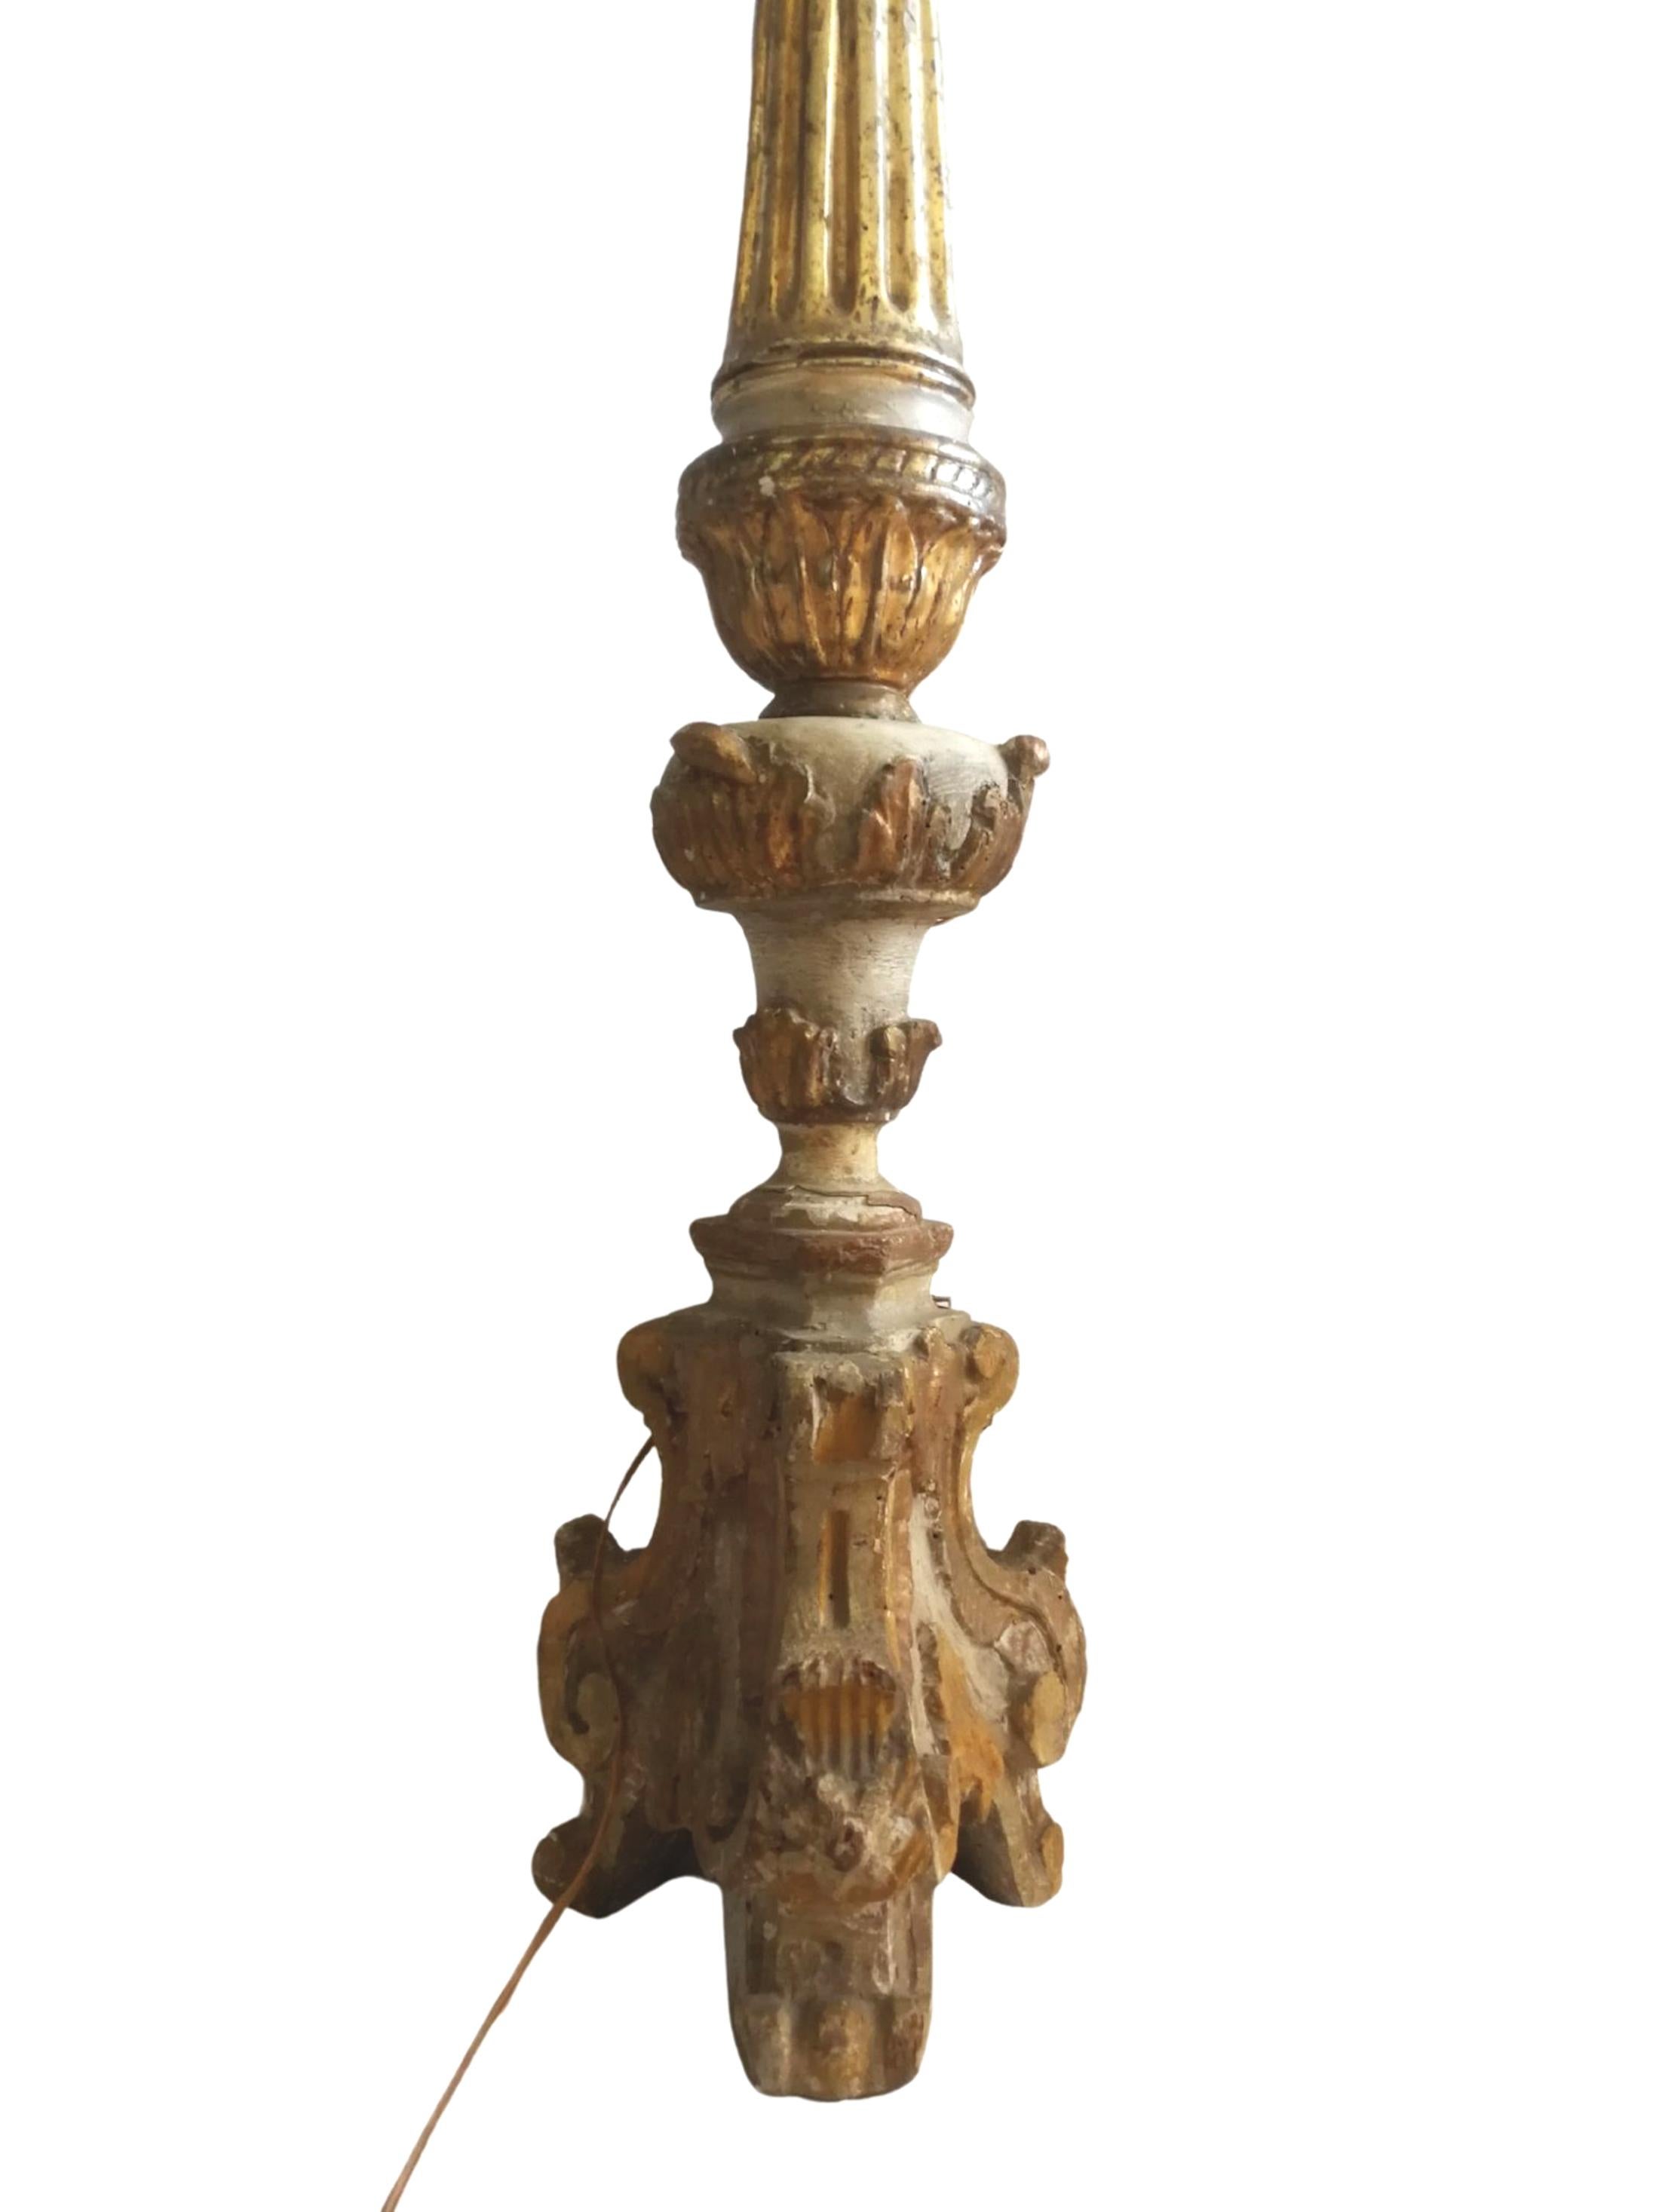 Superb Spanish painted and gilt wood flambeau of the 18th century
The lower half of the flambeau is hand carved with vegetal and acanthus decoration and the upper part of the body is fluted in the Louis XVI style and topped by a corolla-shaped